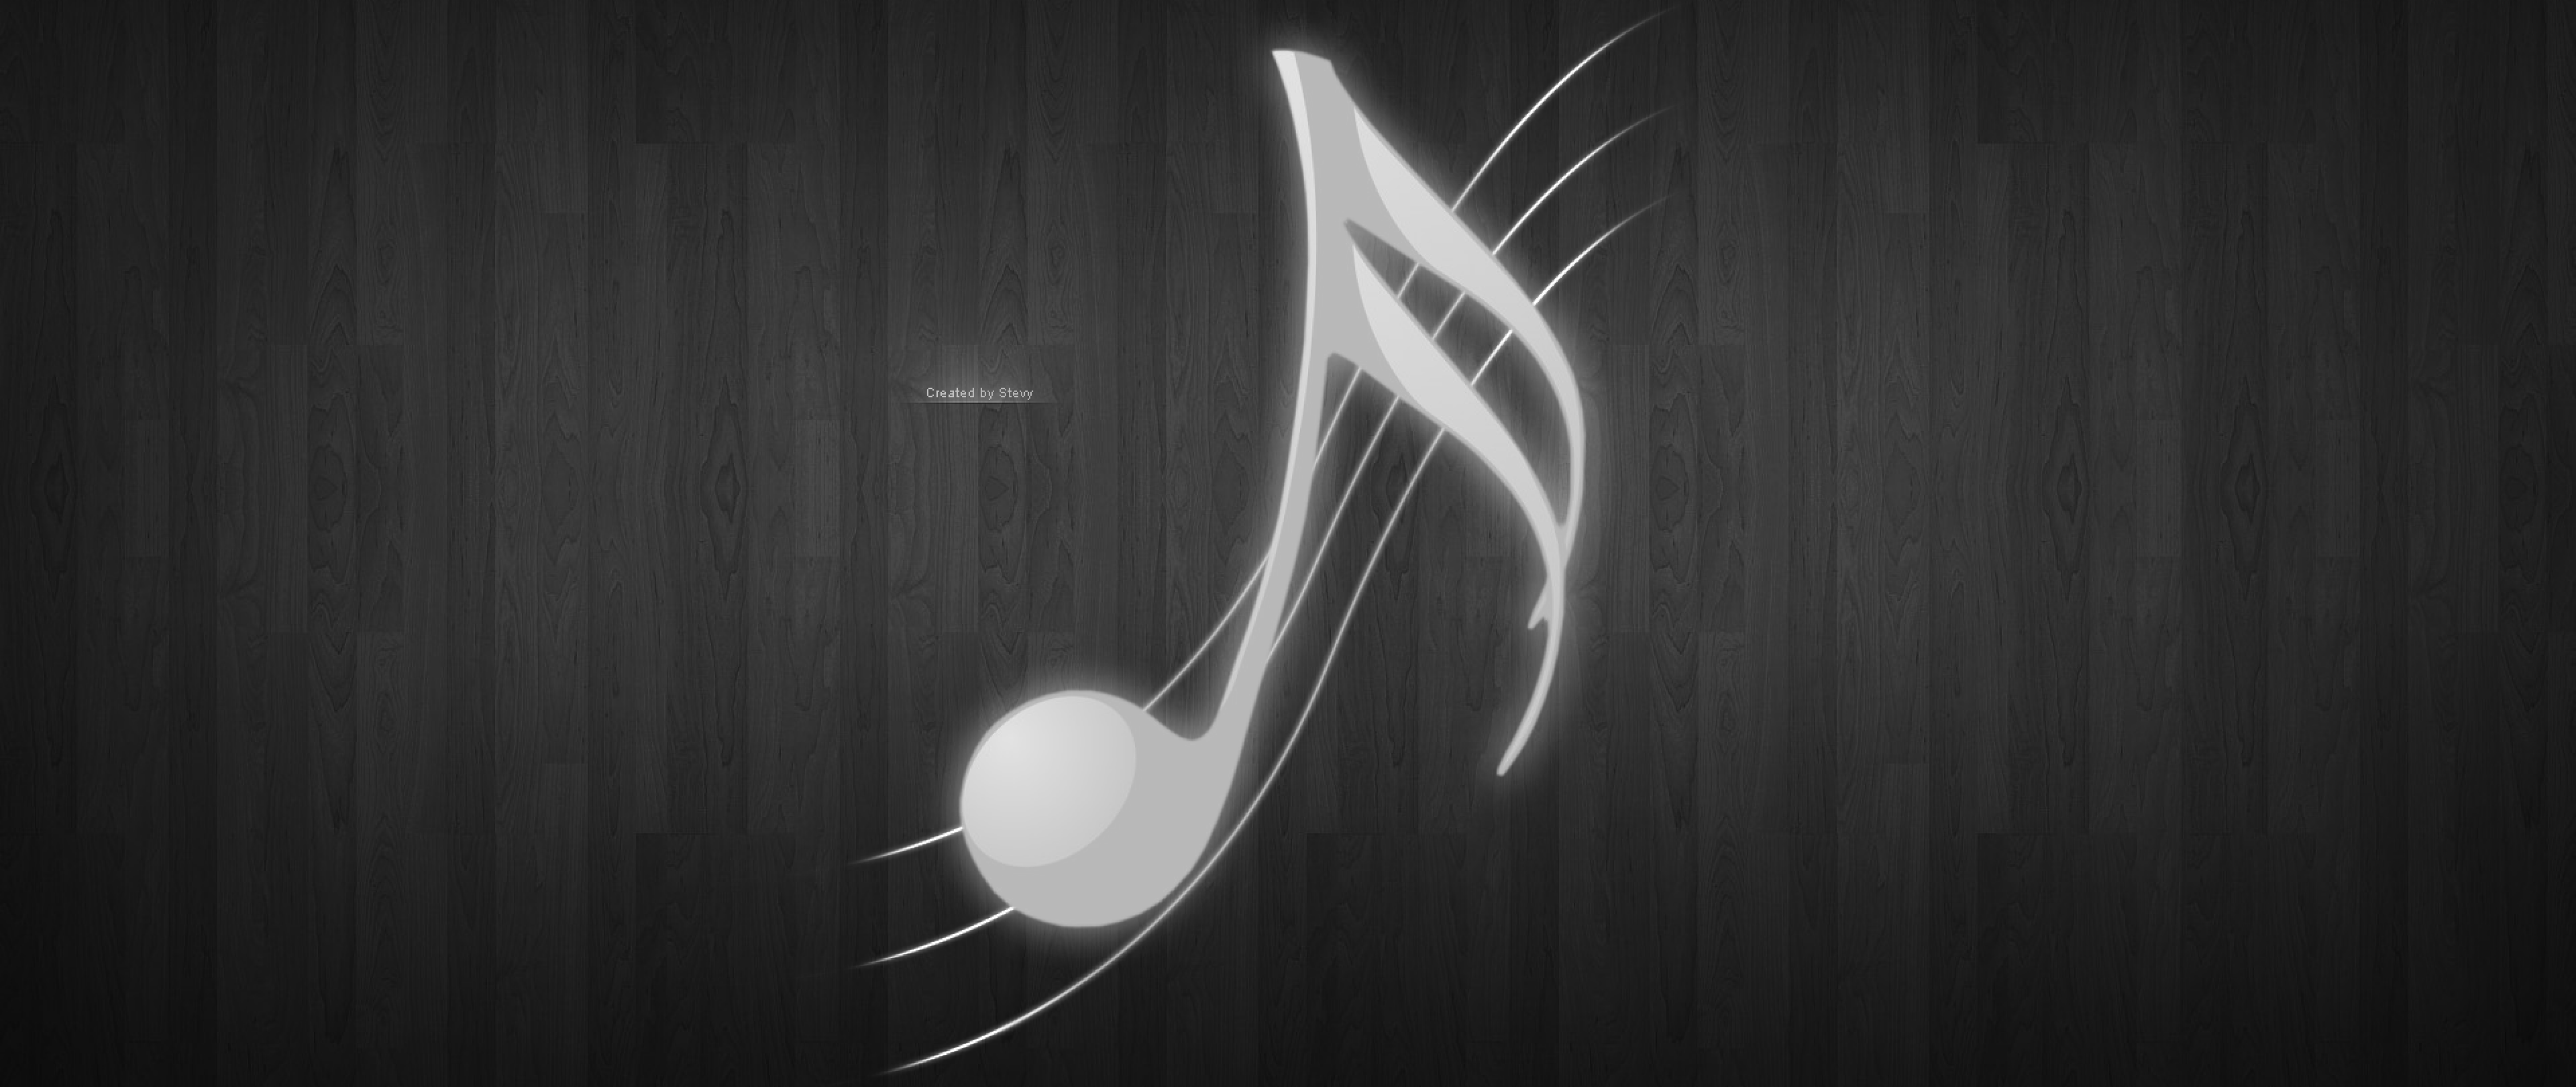 Music Notes HD Wallpaper For Desktop And Mobiles 4k Ultra Wide